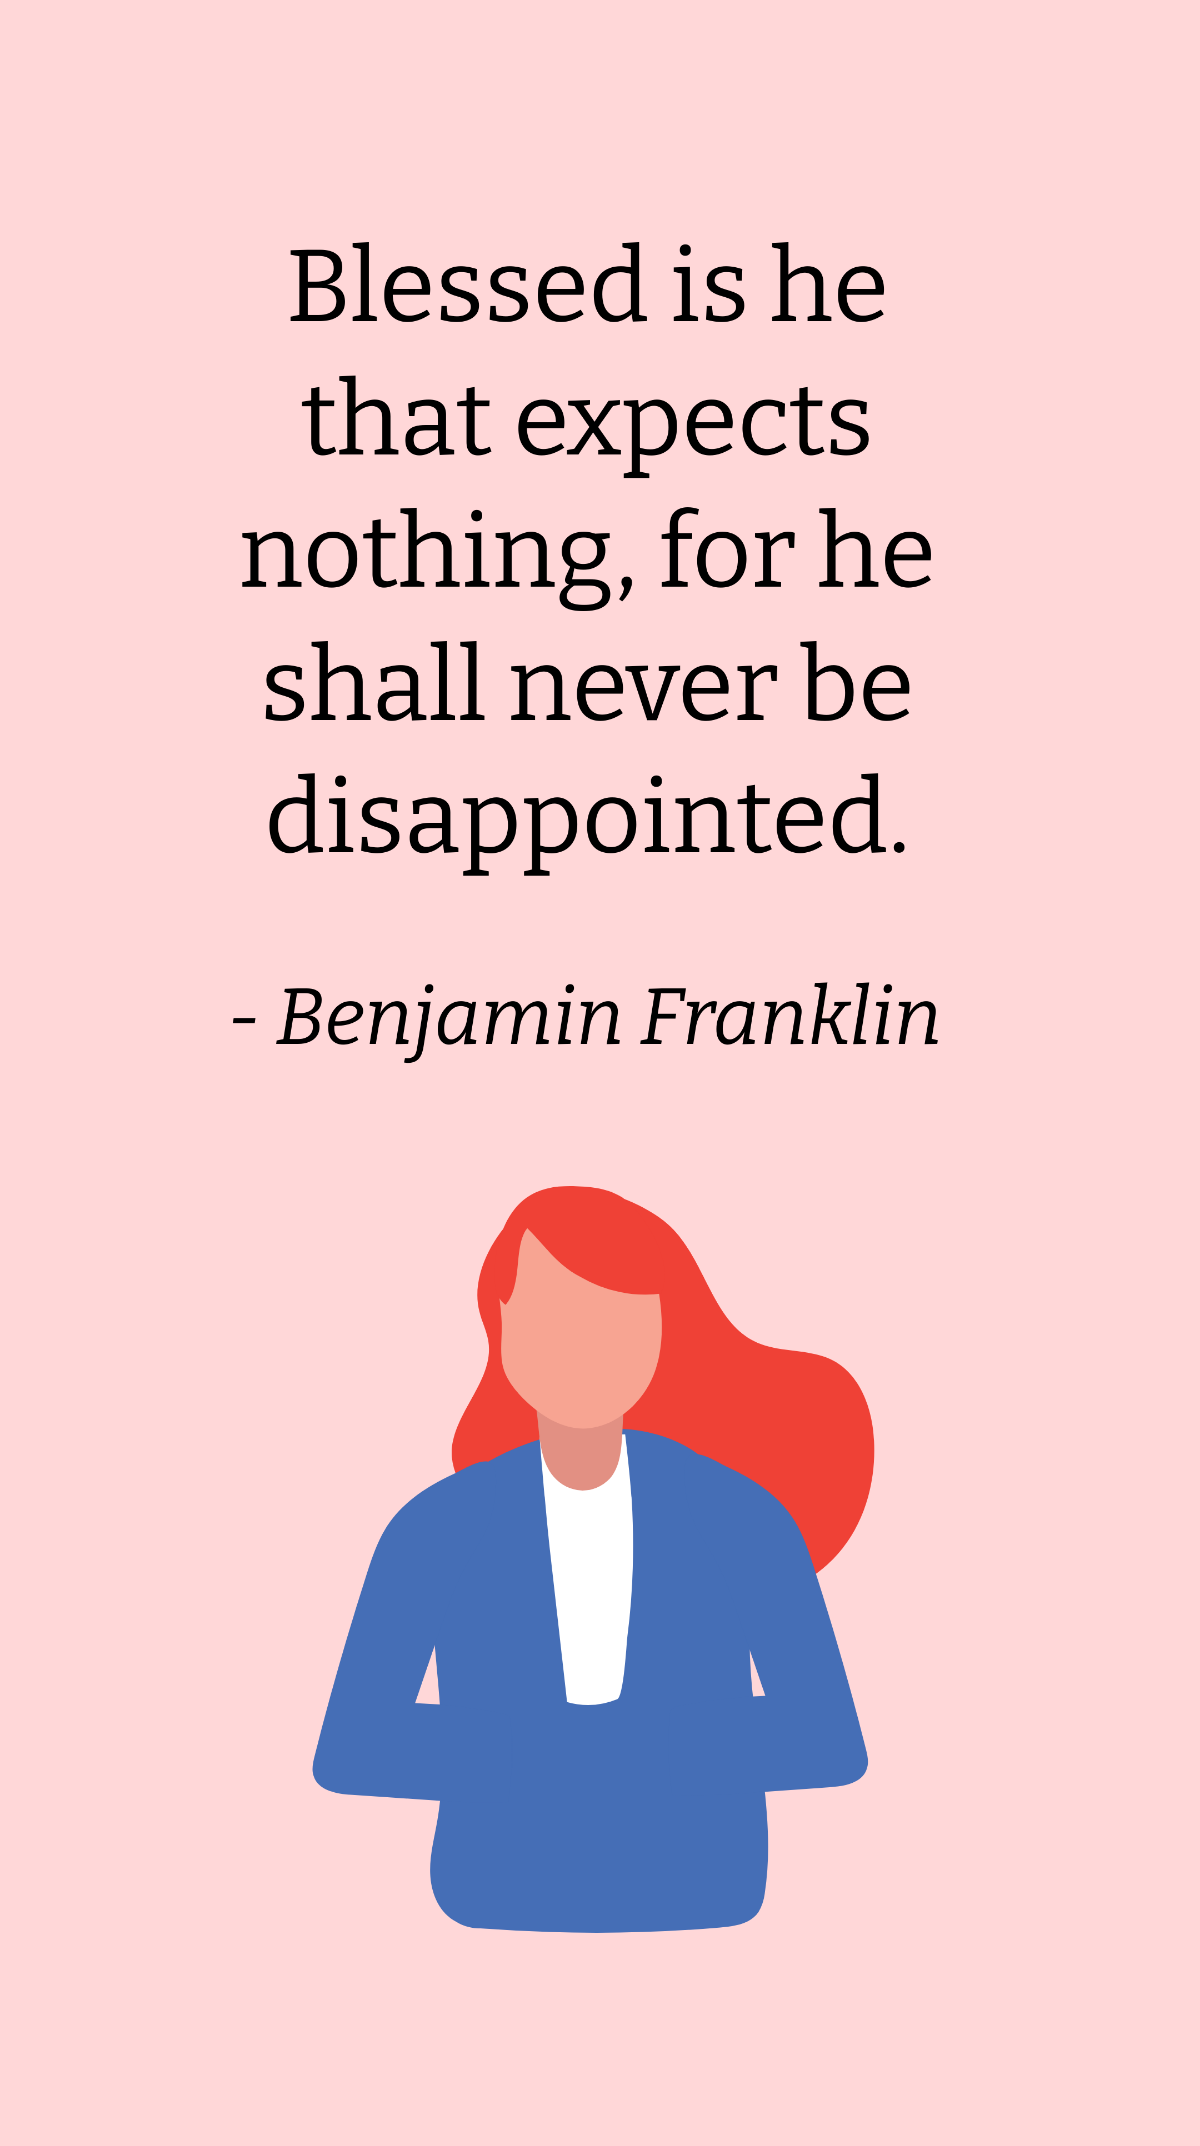 Benjamin Franklin - Blessed is he that expects nothing, for he shall never be disappointed. Template